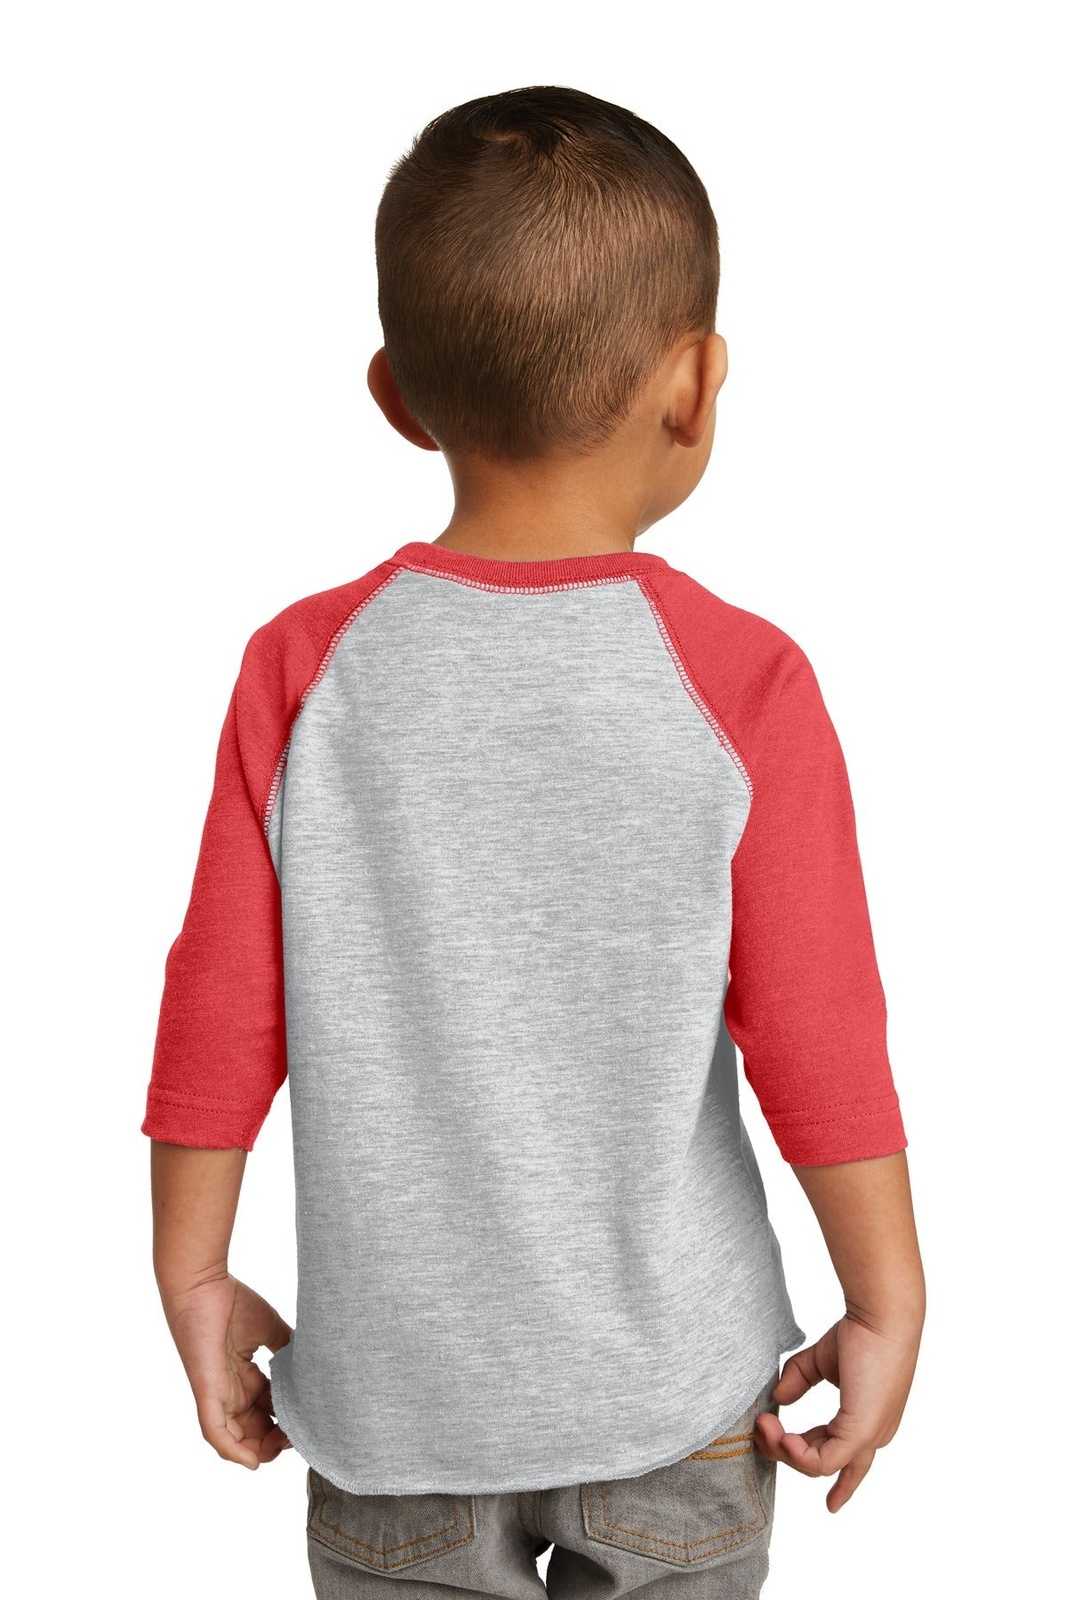 Rabbit Skins 3330 Toddler Baseball Fine Jersey Tee - Vintage Heather Vintage Red - HIT a Double